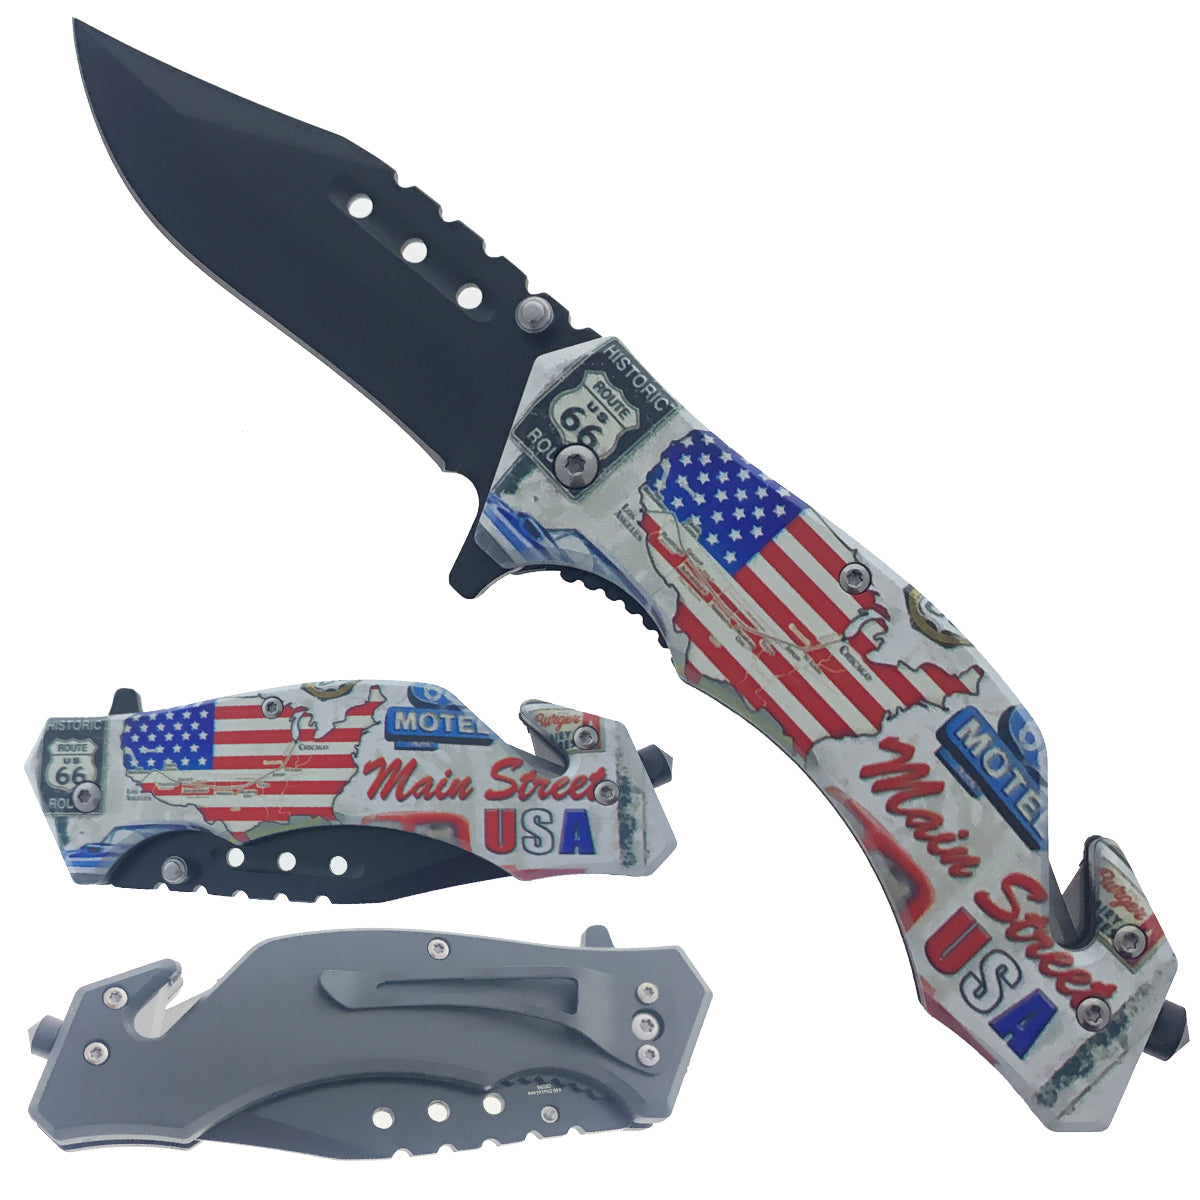 4.5" Spring Assisted American Heritage Rescue Folding Pocket Knife - Historic Route 66 - Bladevip